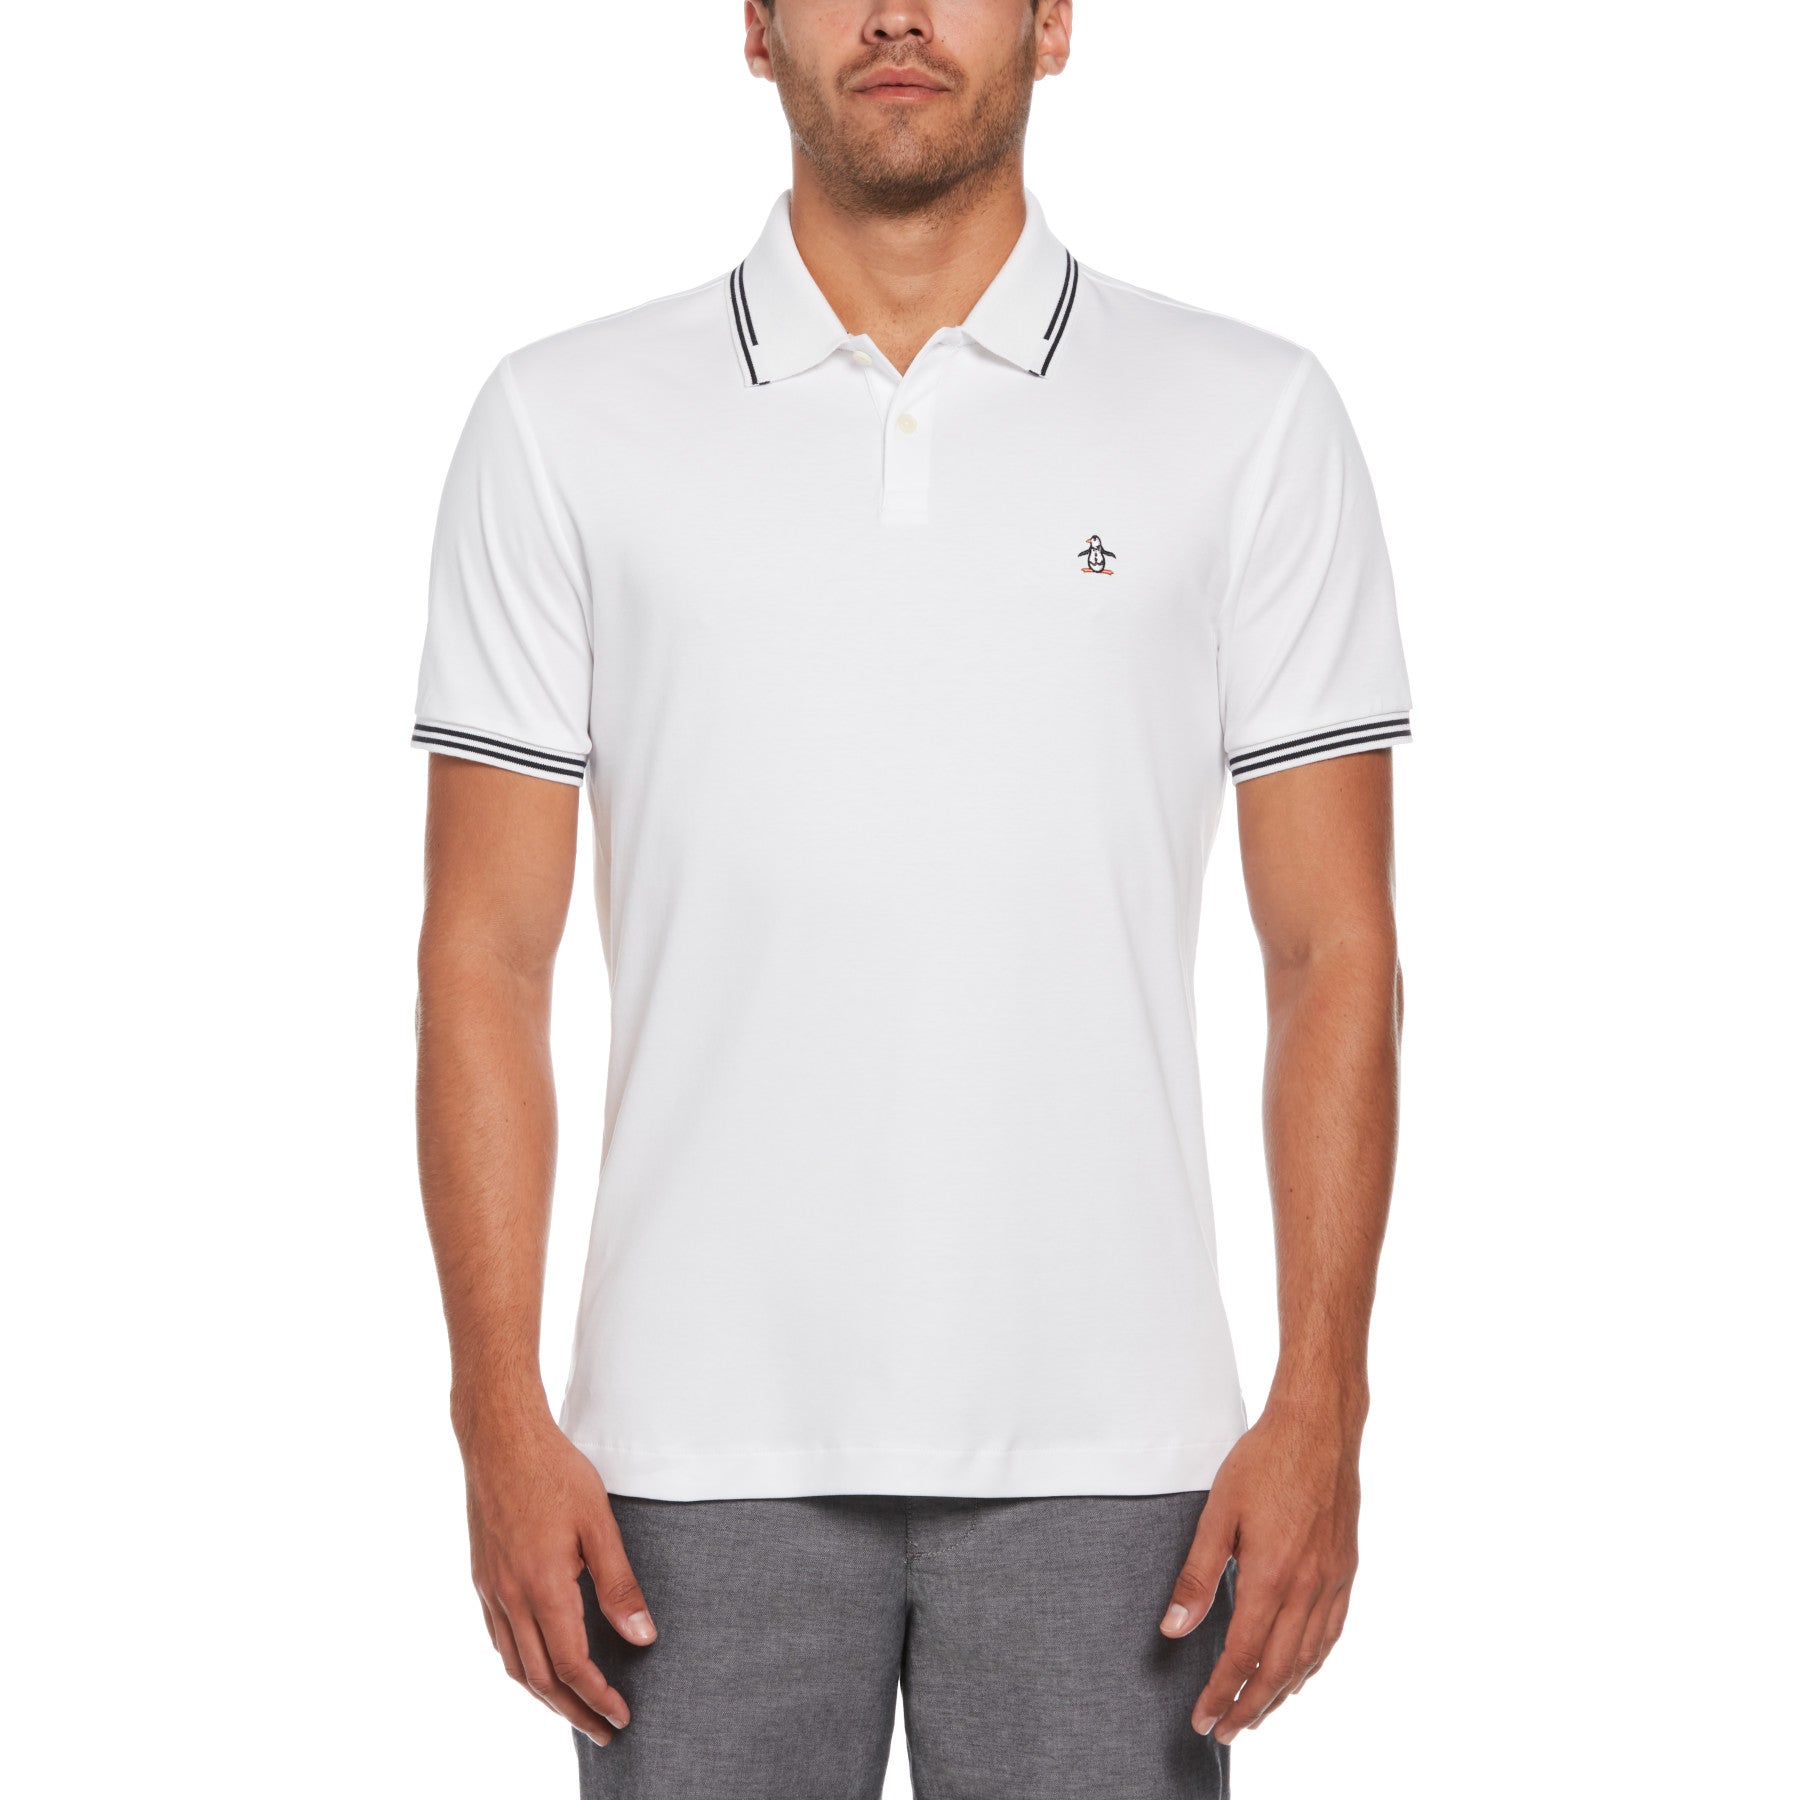 View Icons Organic Cotton Tipped Polo Shirt In Bright White information